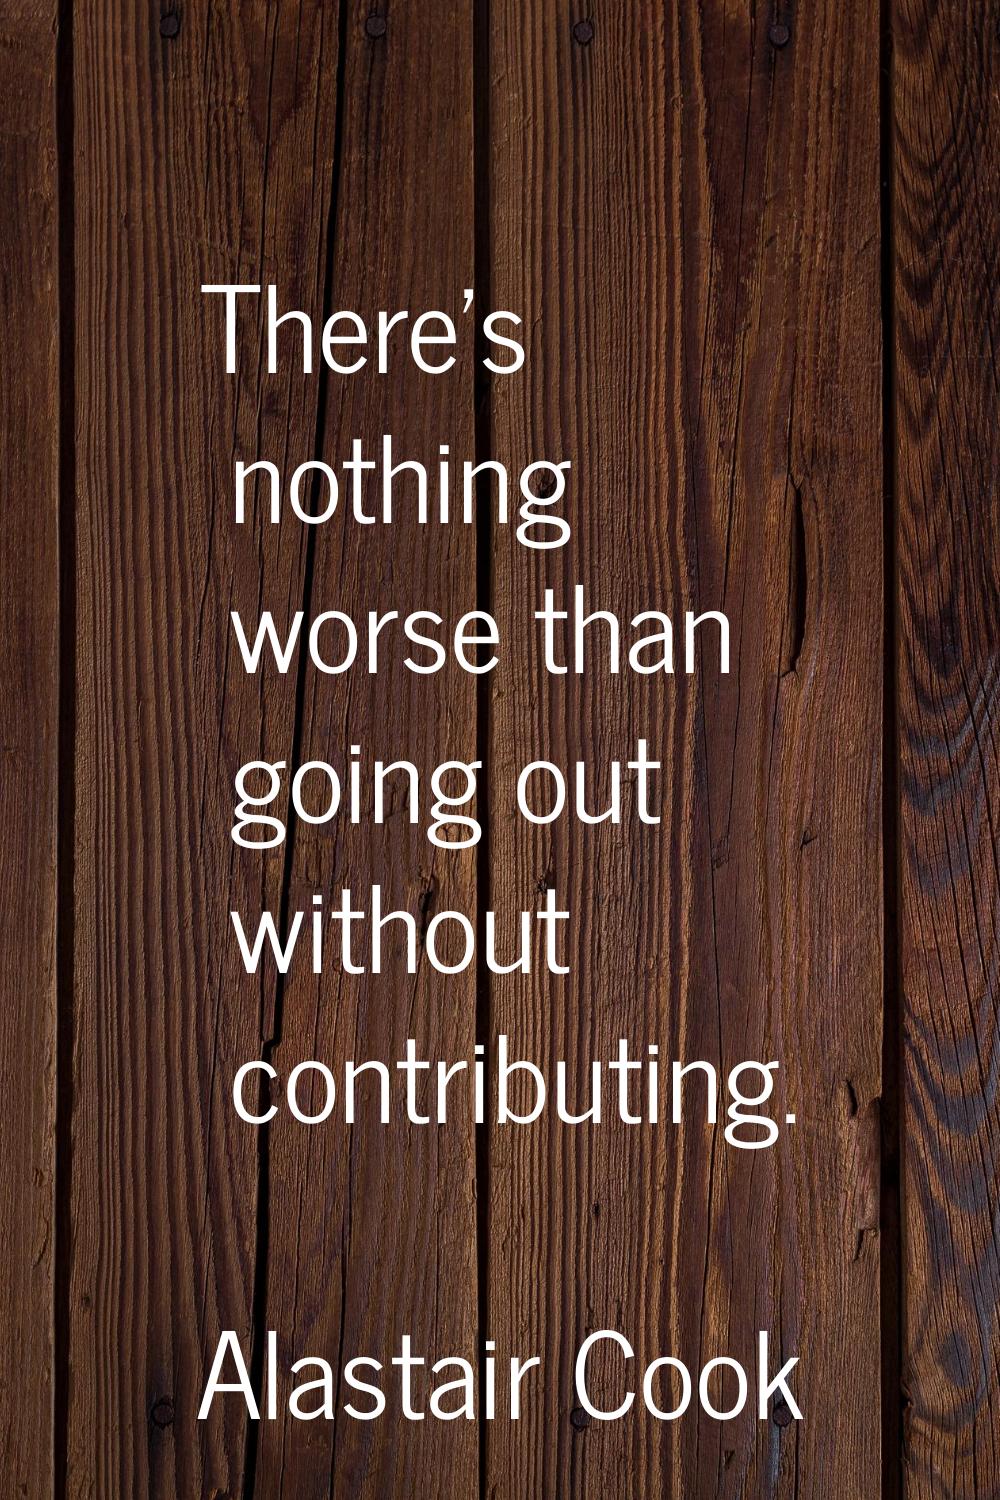 There's nothing worse than going out without contributing.